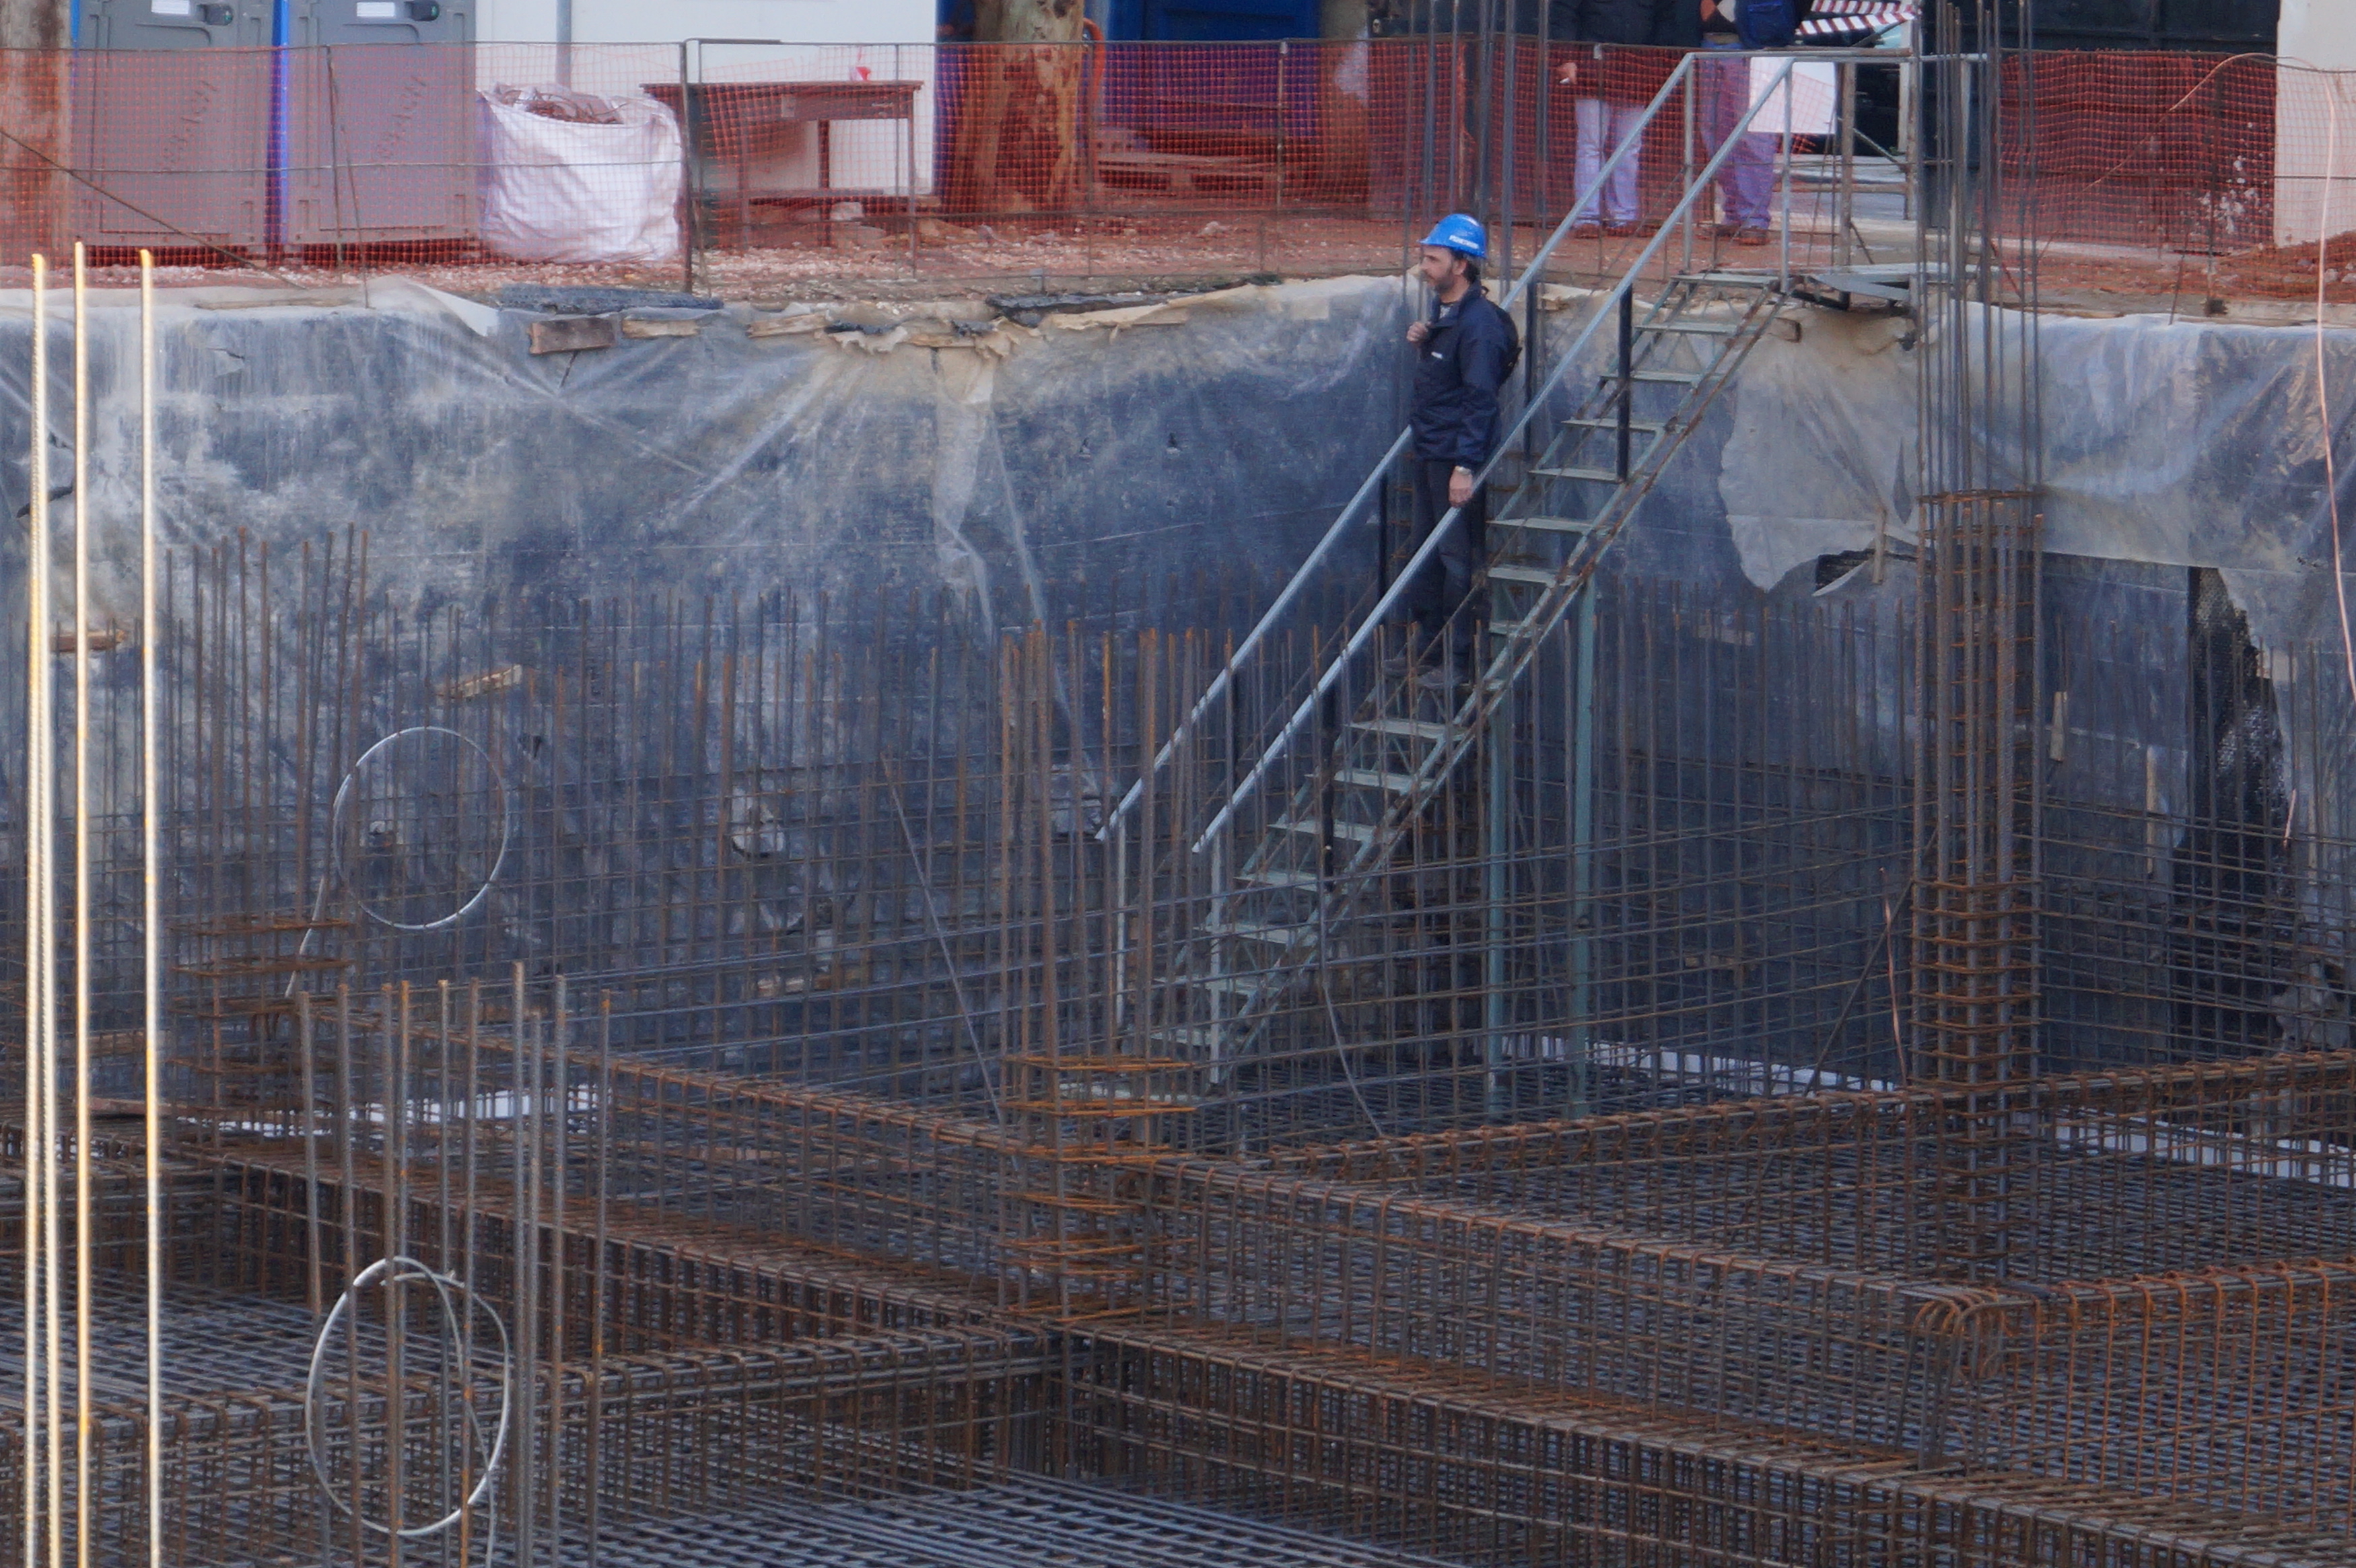 PENETRON on call: Before any concrete is poured, a technical support specialist from PENETRON Hellas inspects the construction site to help ensure the best possible results.